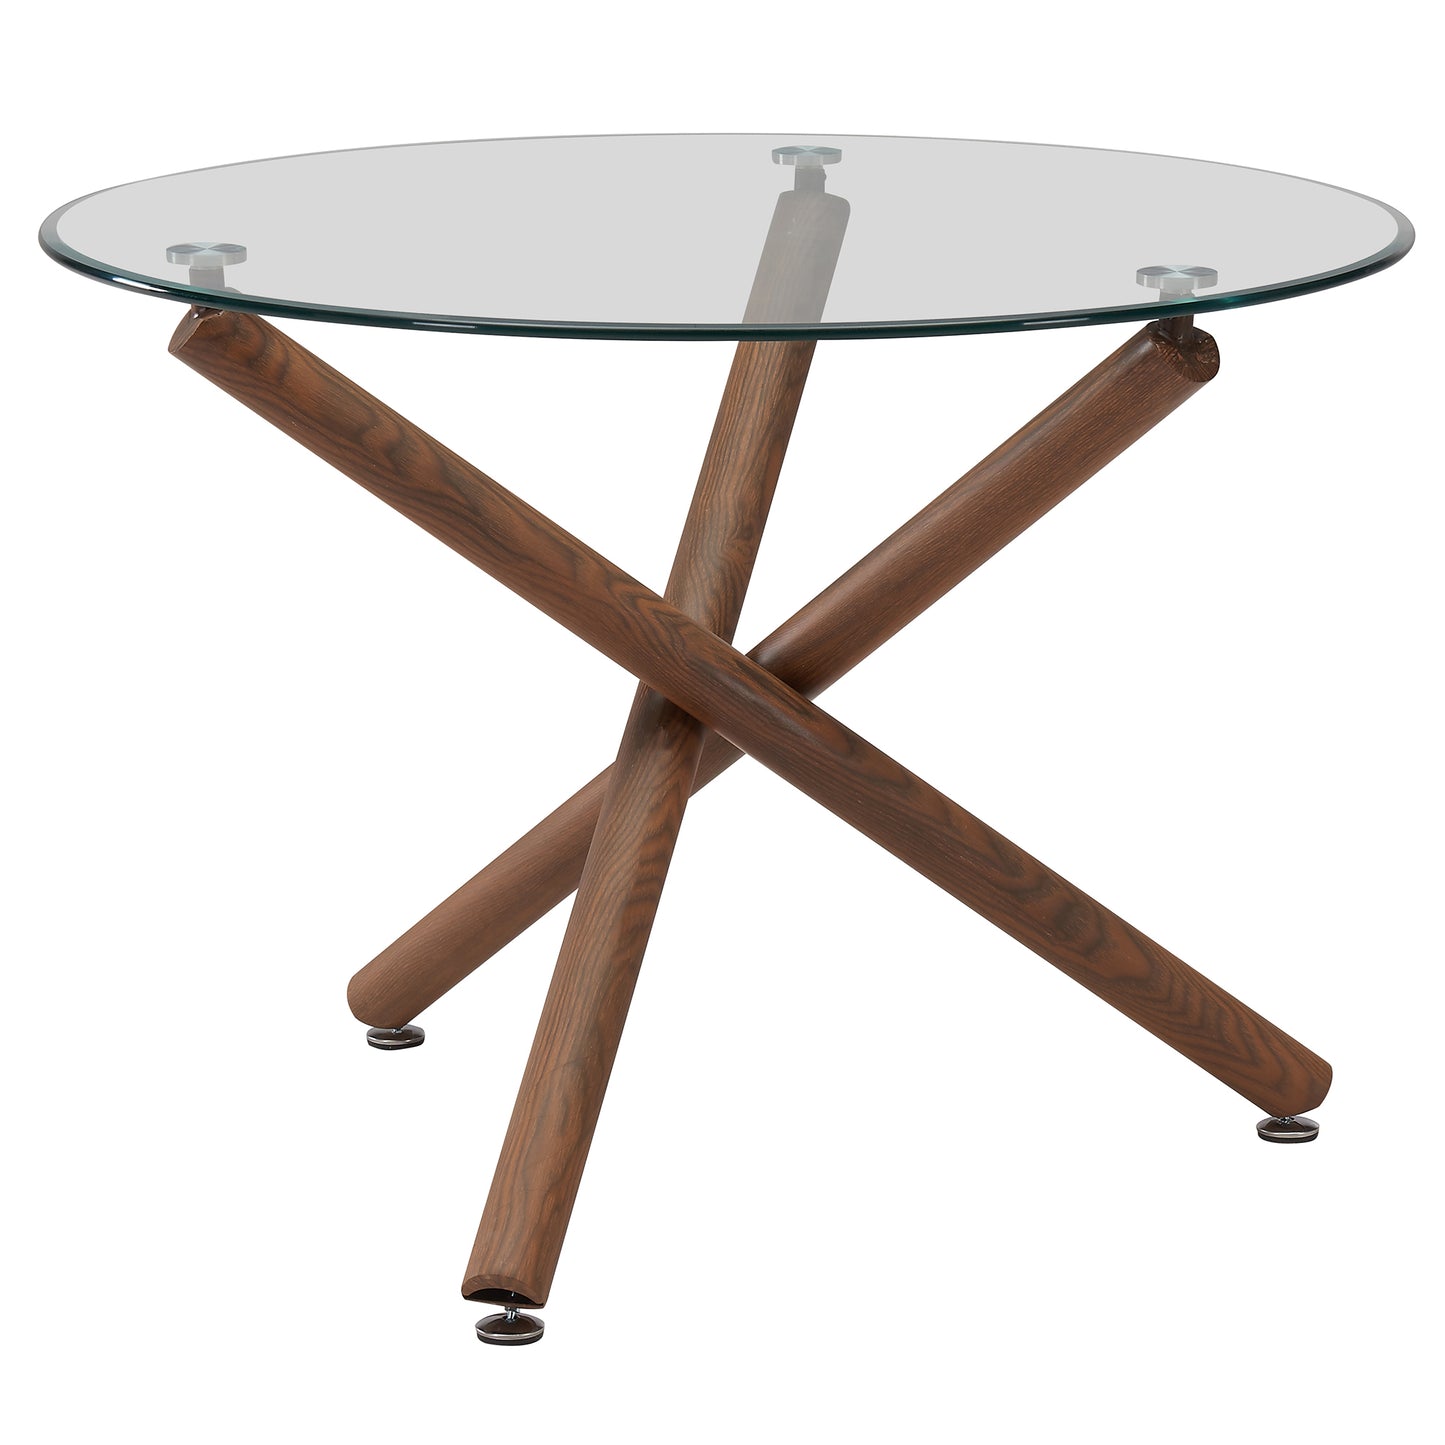 (ROCCA- CORA GREY- 5)- 39" ROUND- GLASS DINING TABLE- WITH 4 CHAIRS